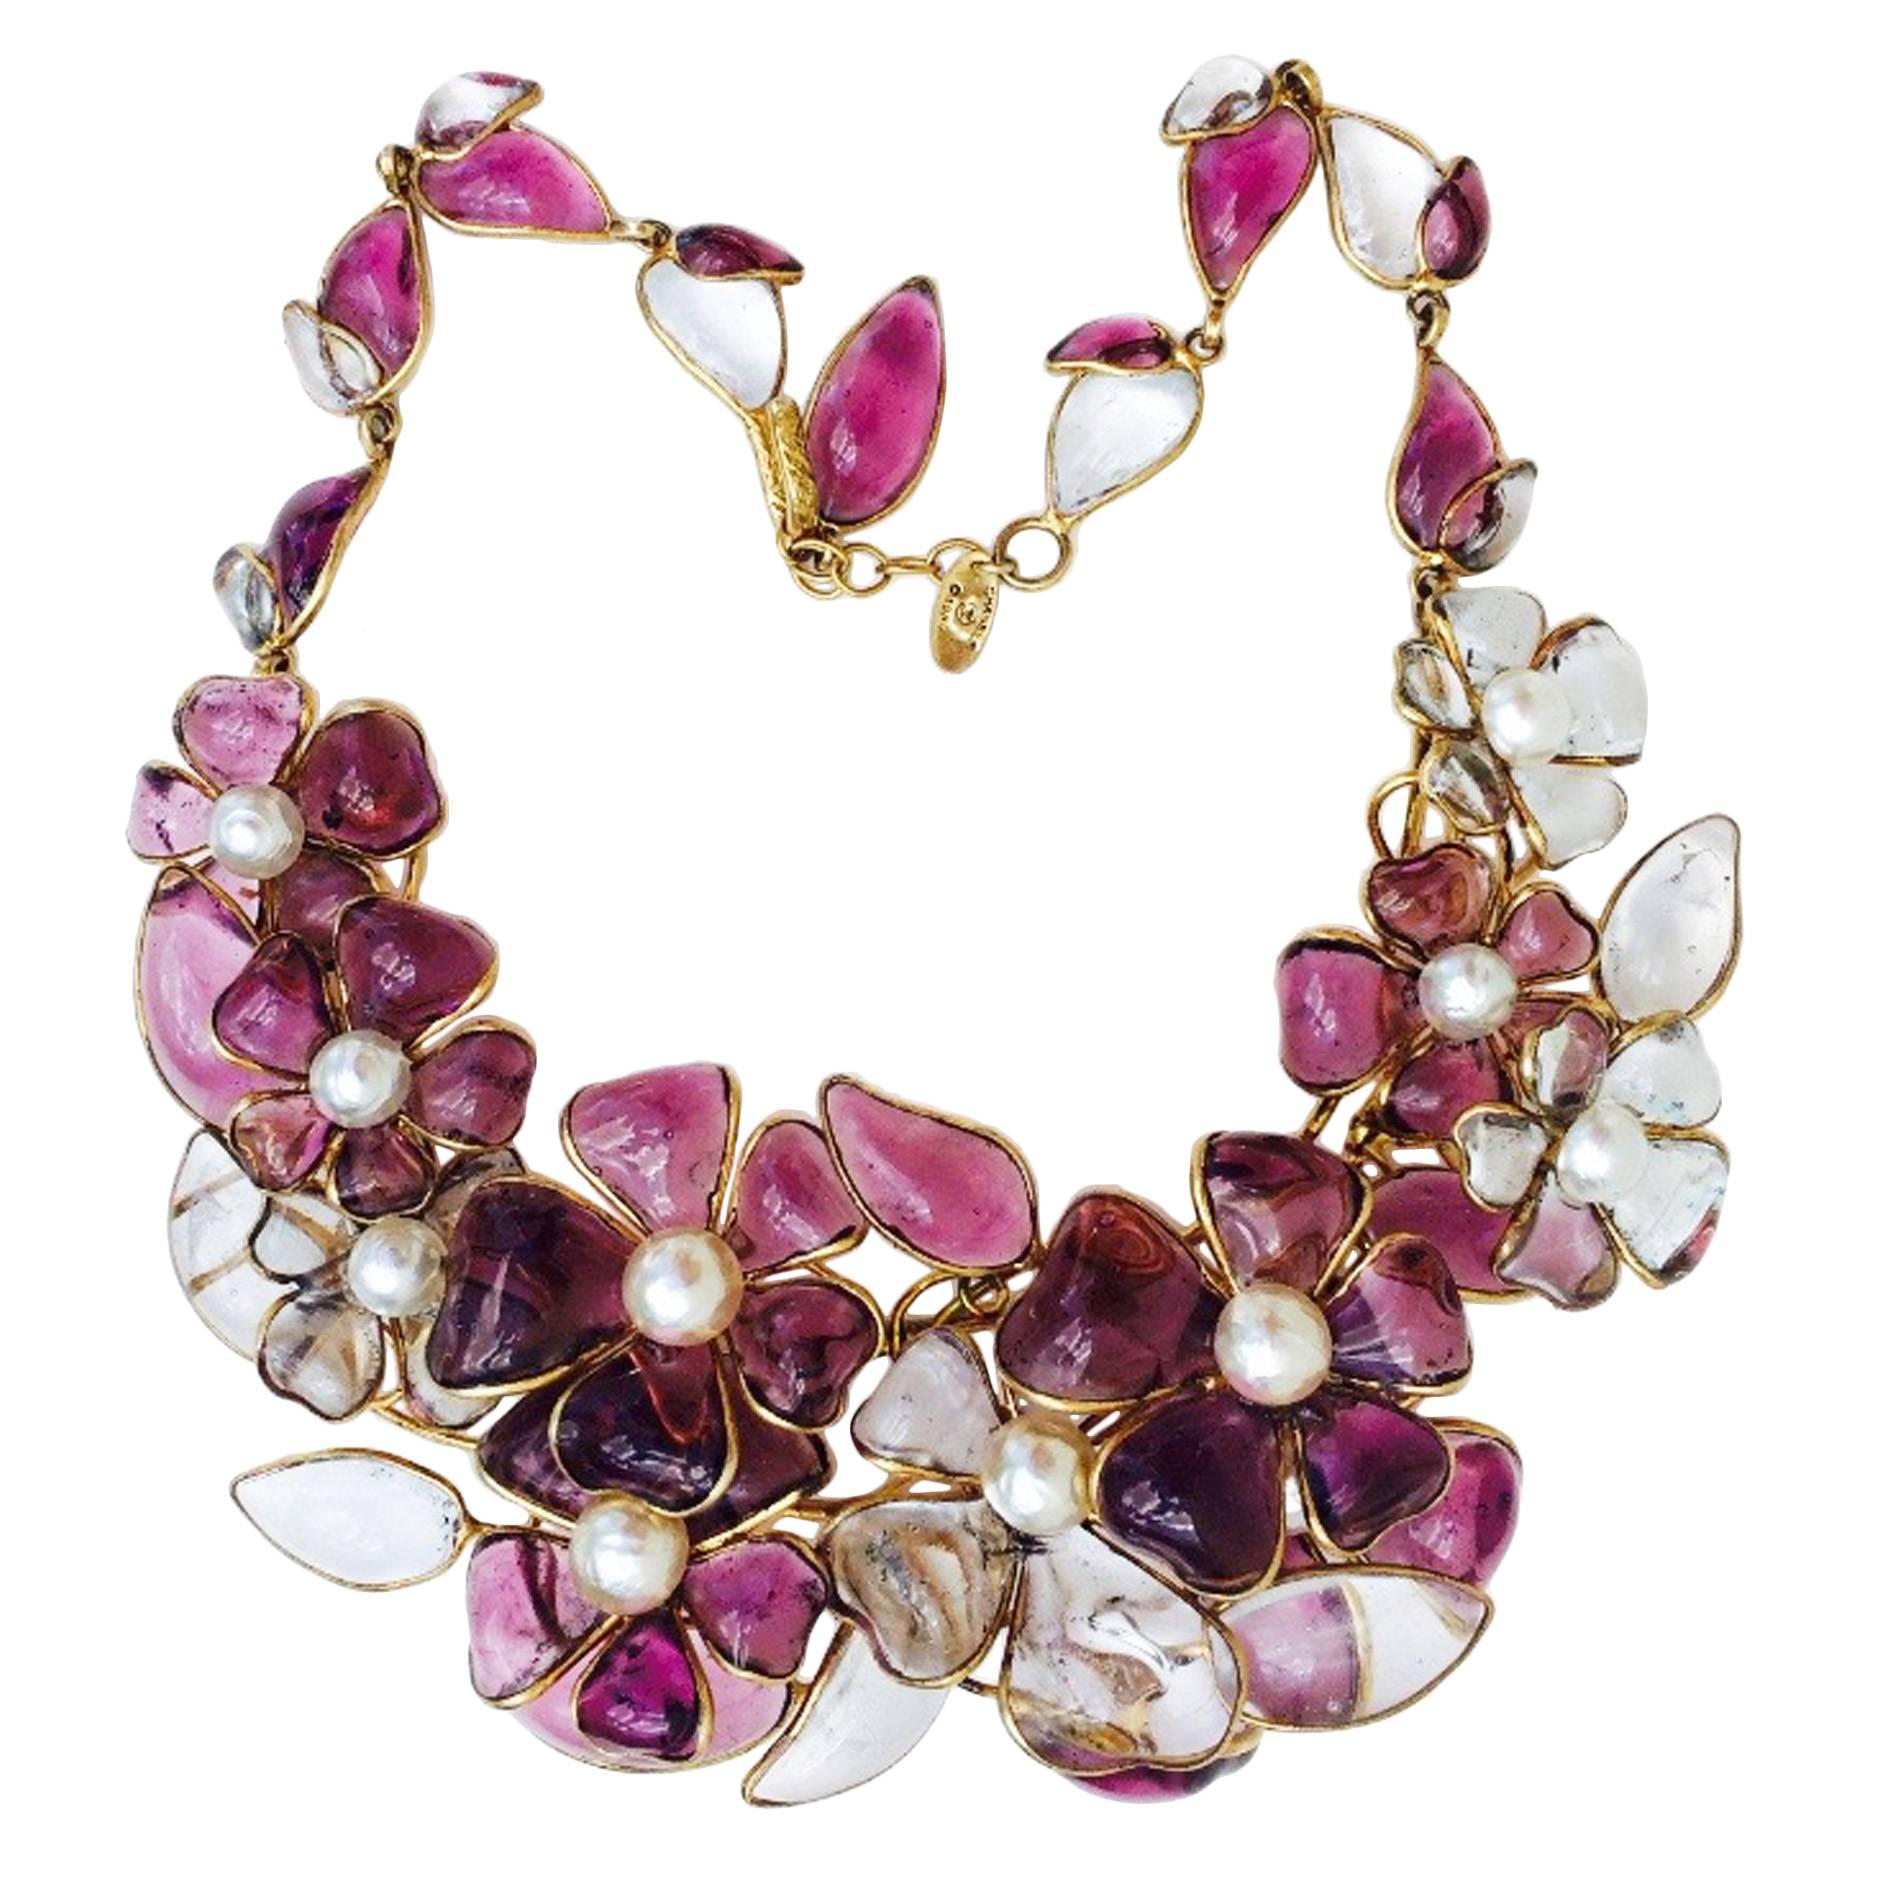 Maison Gripoix for Chanel Poured Glass Necklace, 1984